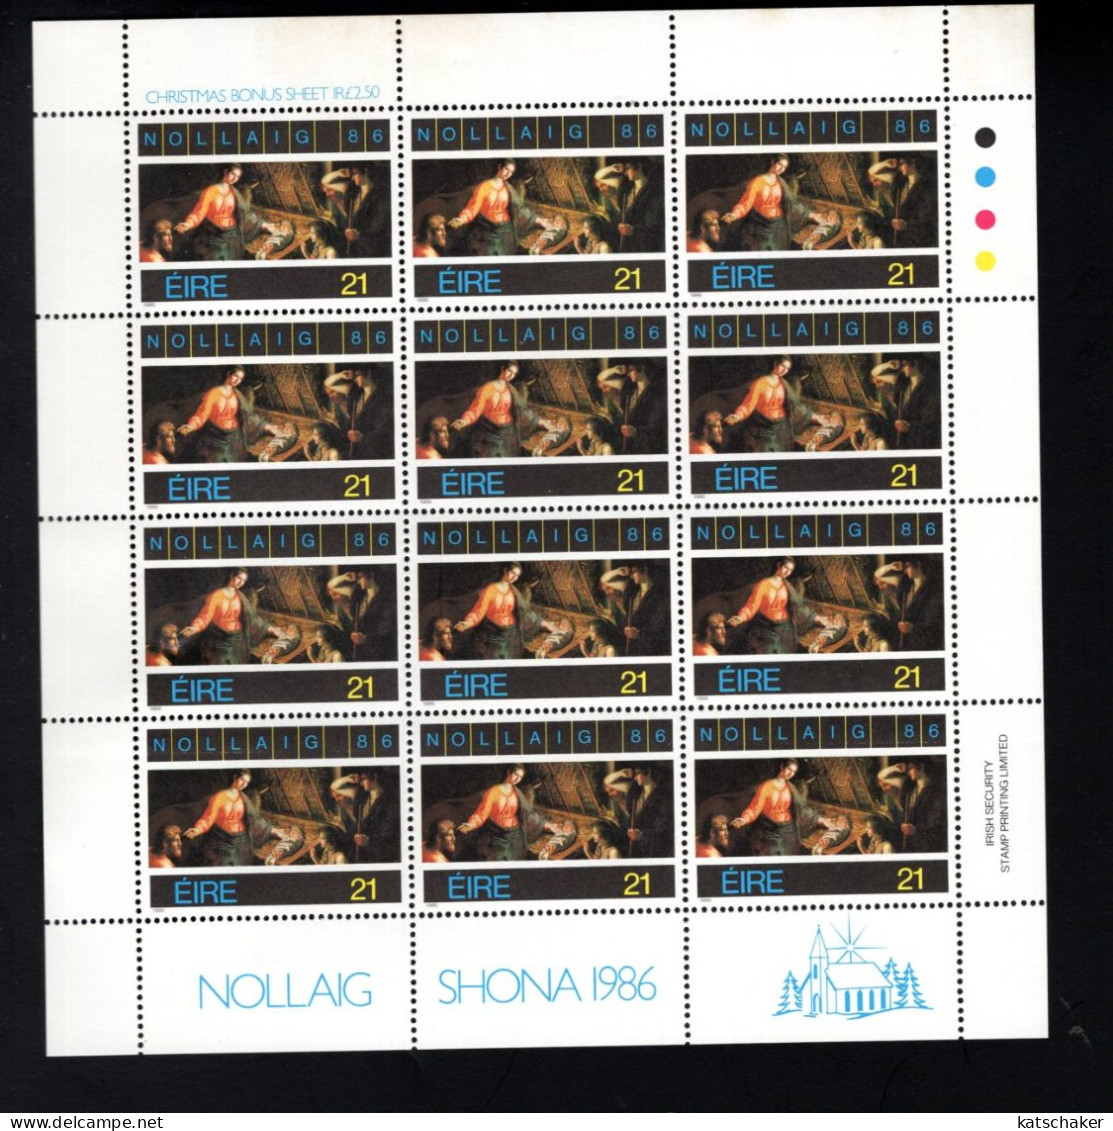 1999459424 1986  SCOTT 677 (XX) POSTFRIS  MINT NEVER HINGED - CHRISTMAS - ADORATION OF THE SHEPPERS DISCOUNT SHEET 12 - Nuevos